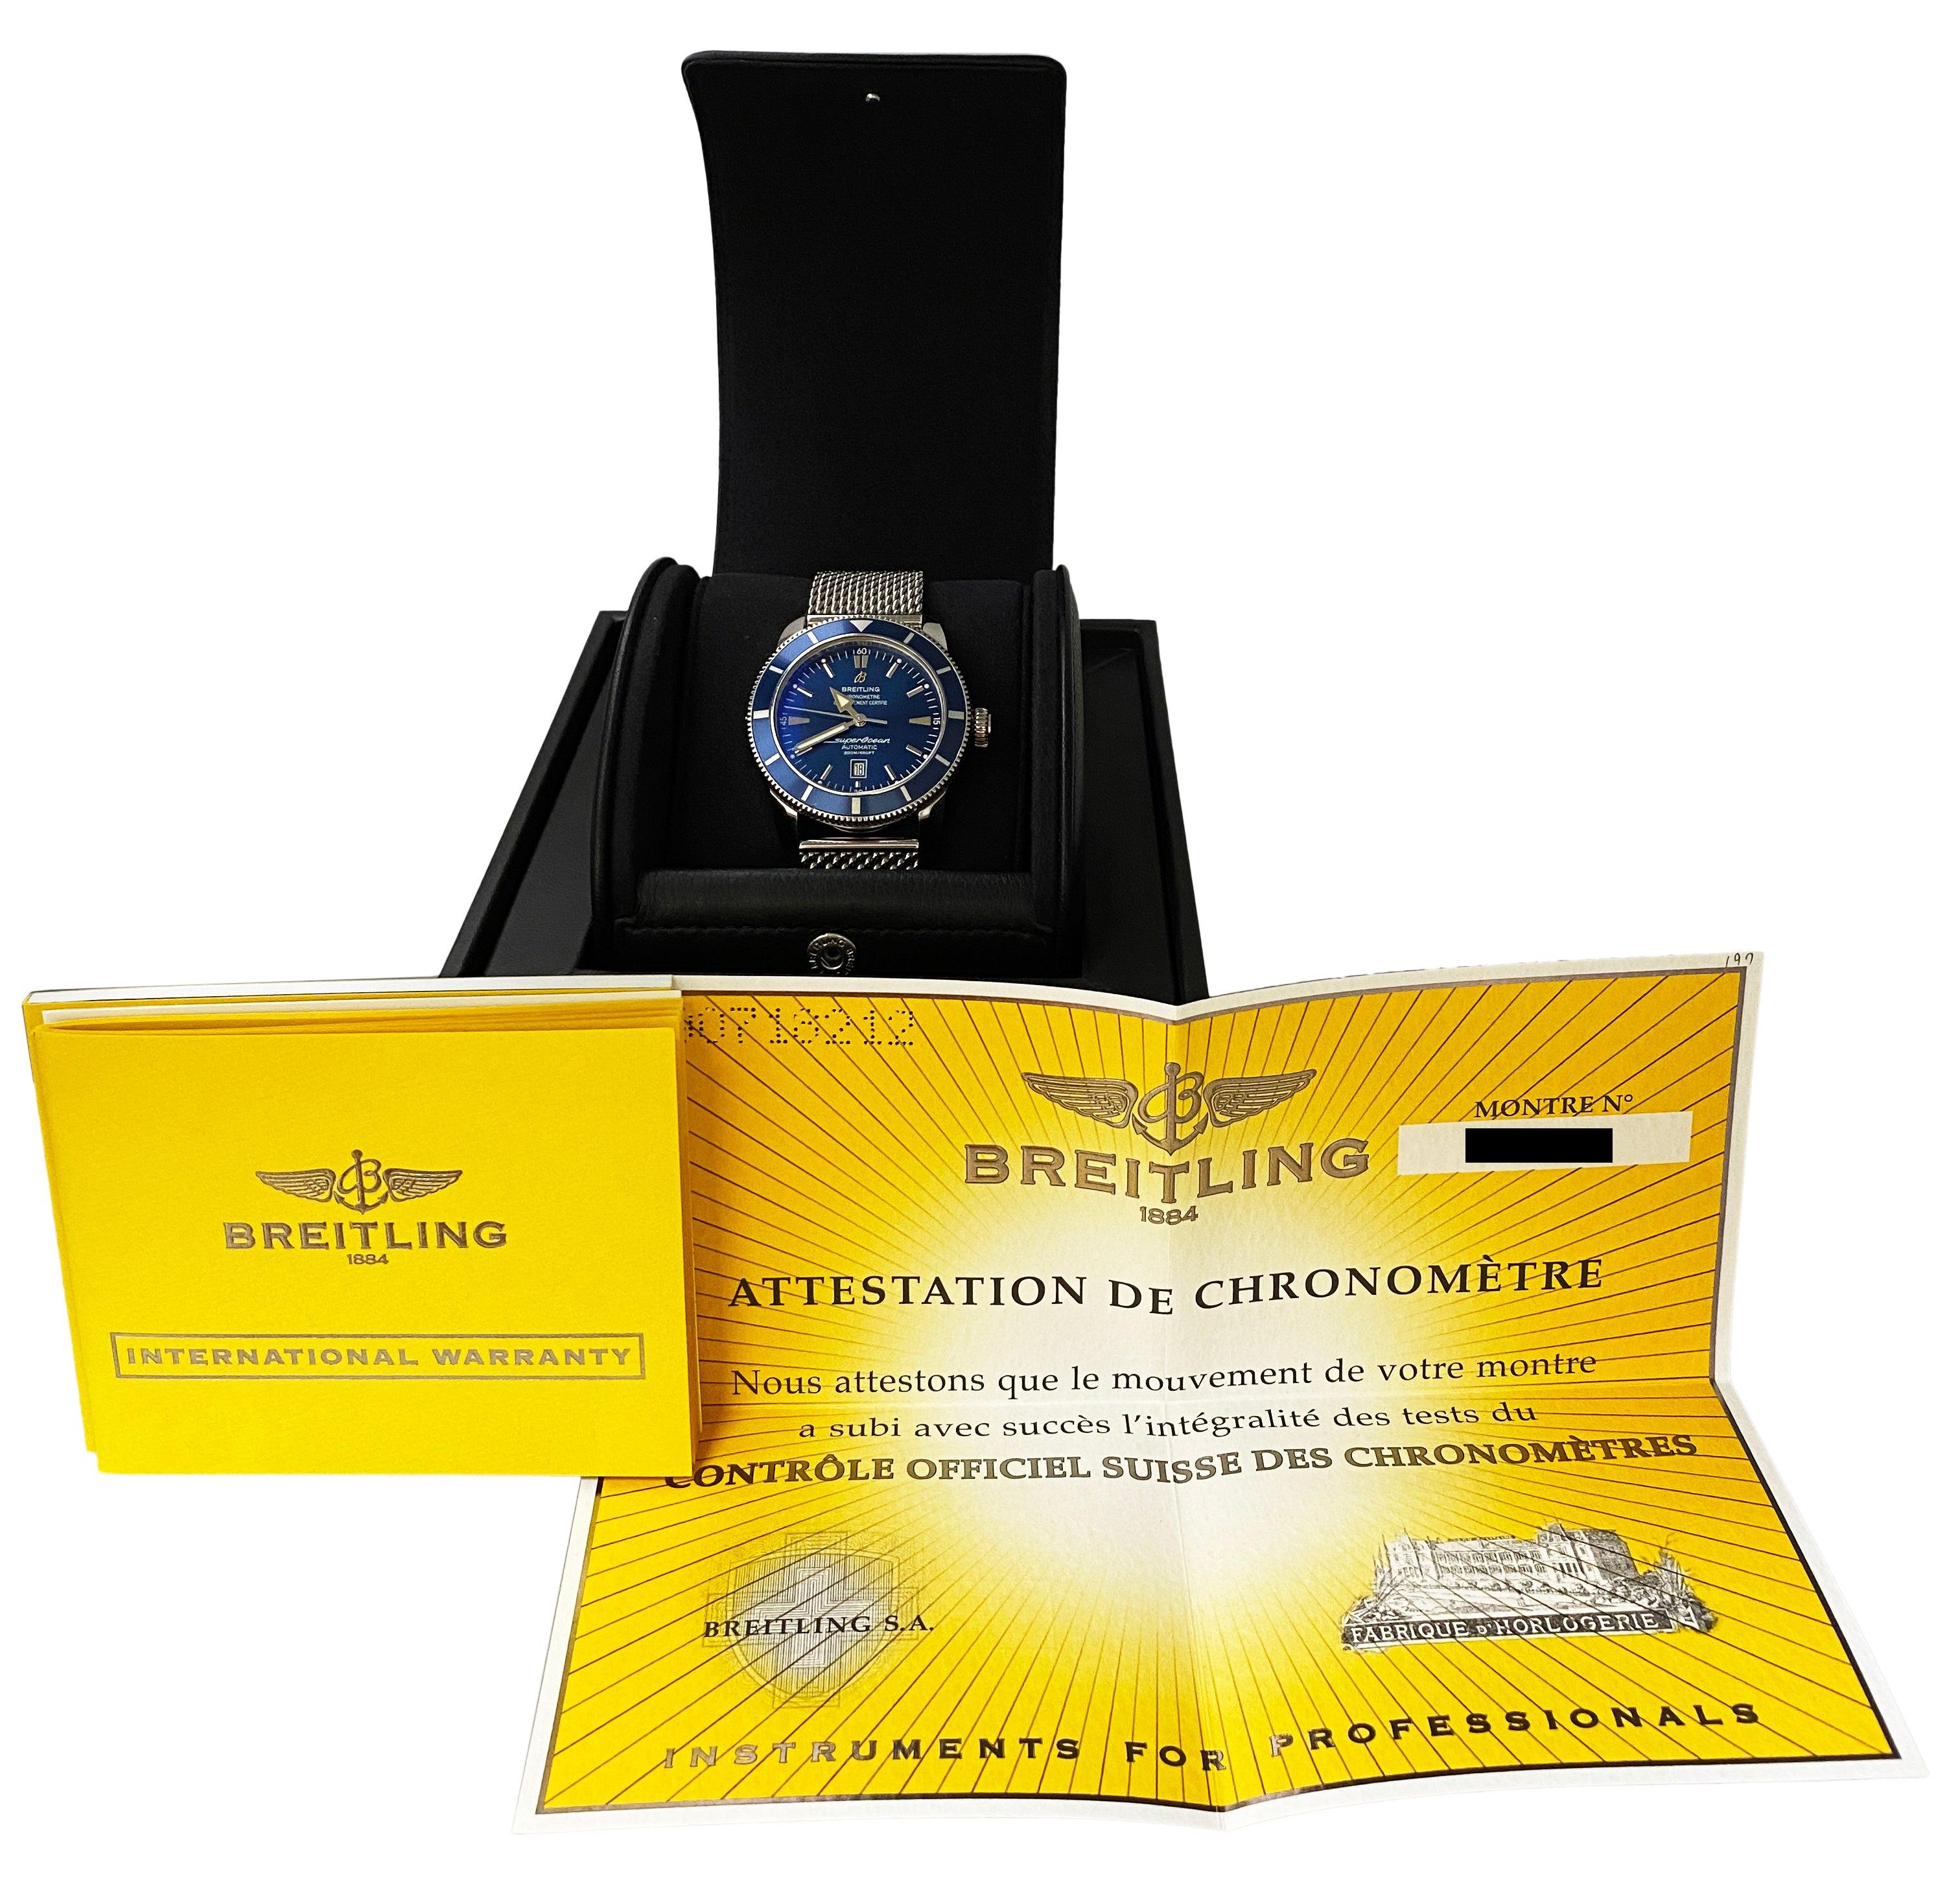 Breitling Superocean Heritage 46 A172C34OCA Mens Watch. 46mm stainless steel case. Stainless steel unidirectional rotating bezel with blue insert. Blue dial with steel hands and index hour marker. Date display at 6 o'clock position. Minute marker on